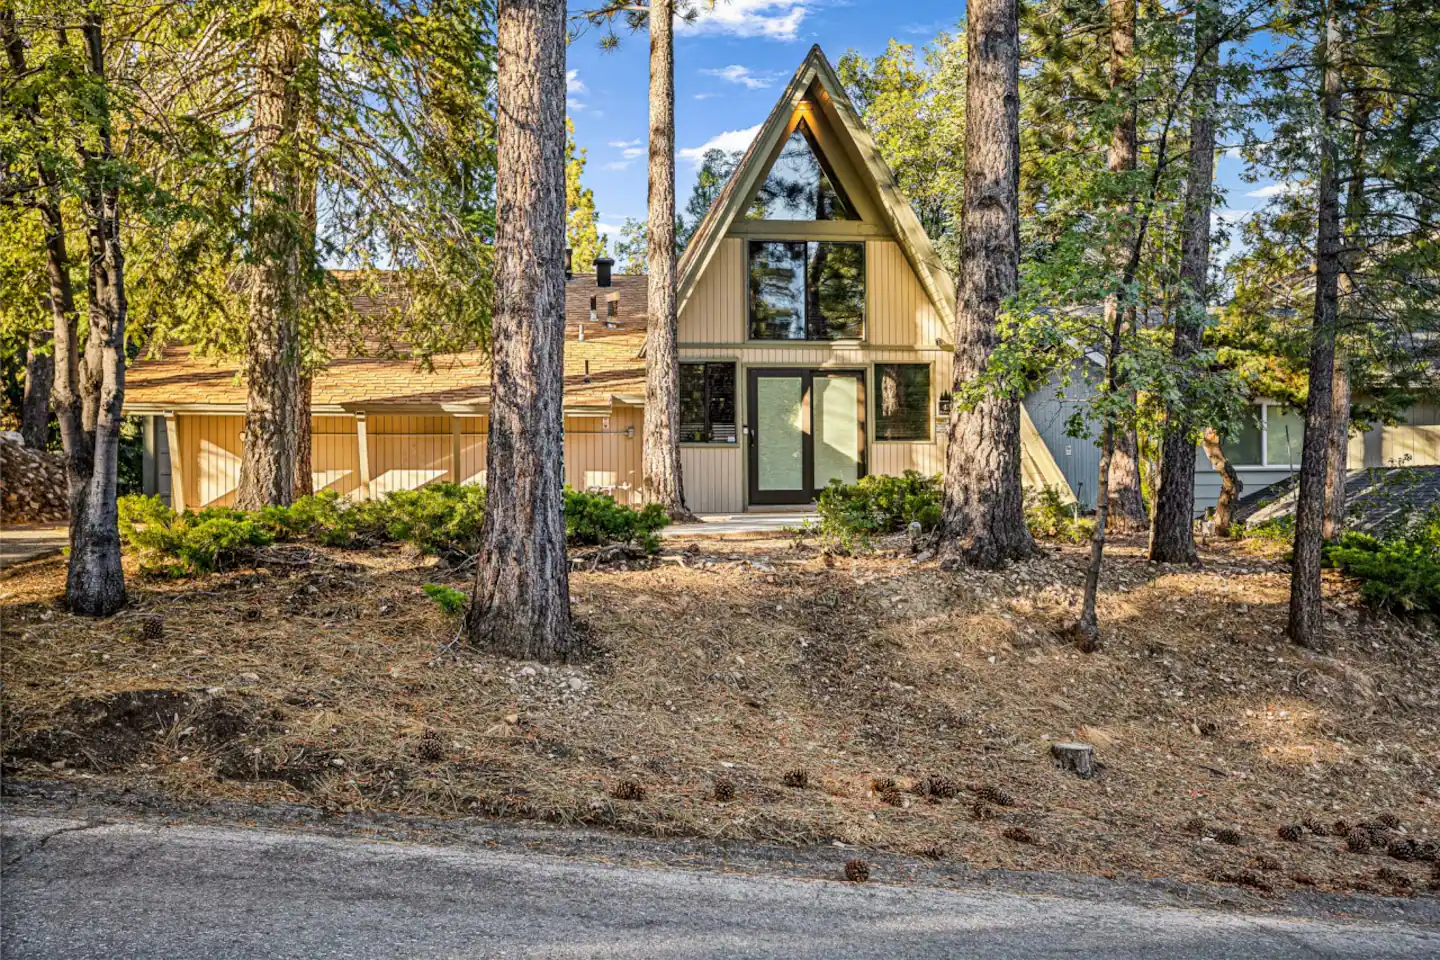 040 Treehouse Cottage A-Frame Big Bear Vacation Rentals